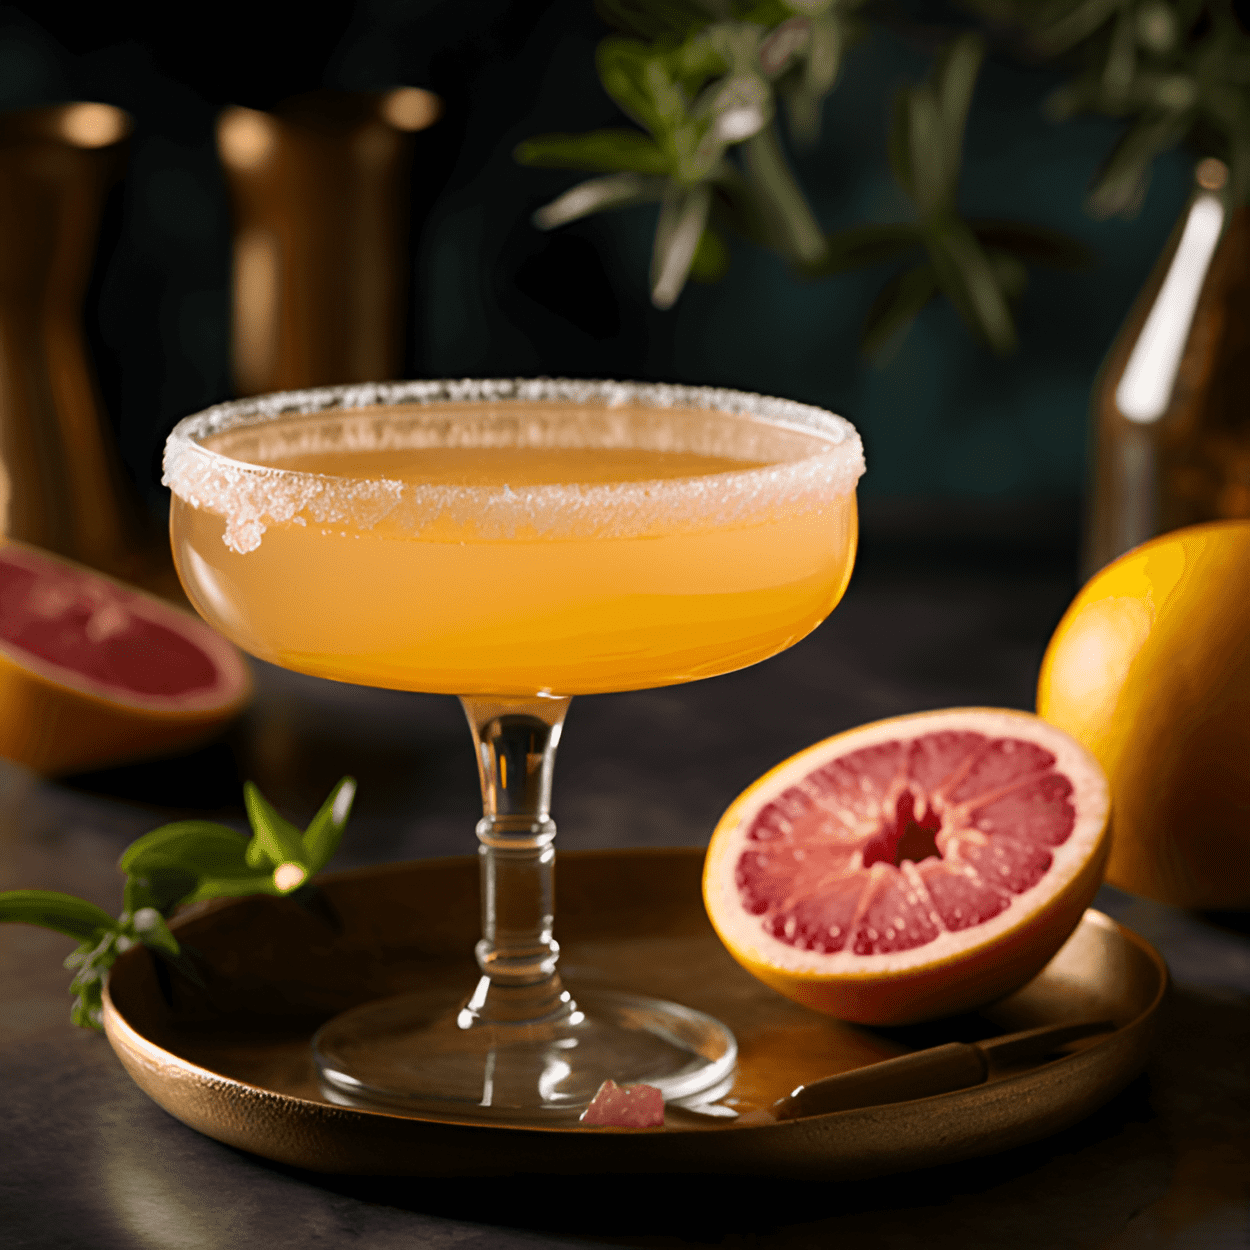 Salty Balls Cocktail Recipe - The Salty Balls cocktail is a delightful blend of sweet, salty, and slightly bitter flavors. The sweetness of the liqueur is perfectly balanced by the saltiness of the rim, while the bitterness of the grapefruit juice adds a refreshing twist.